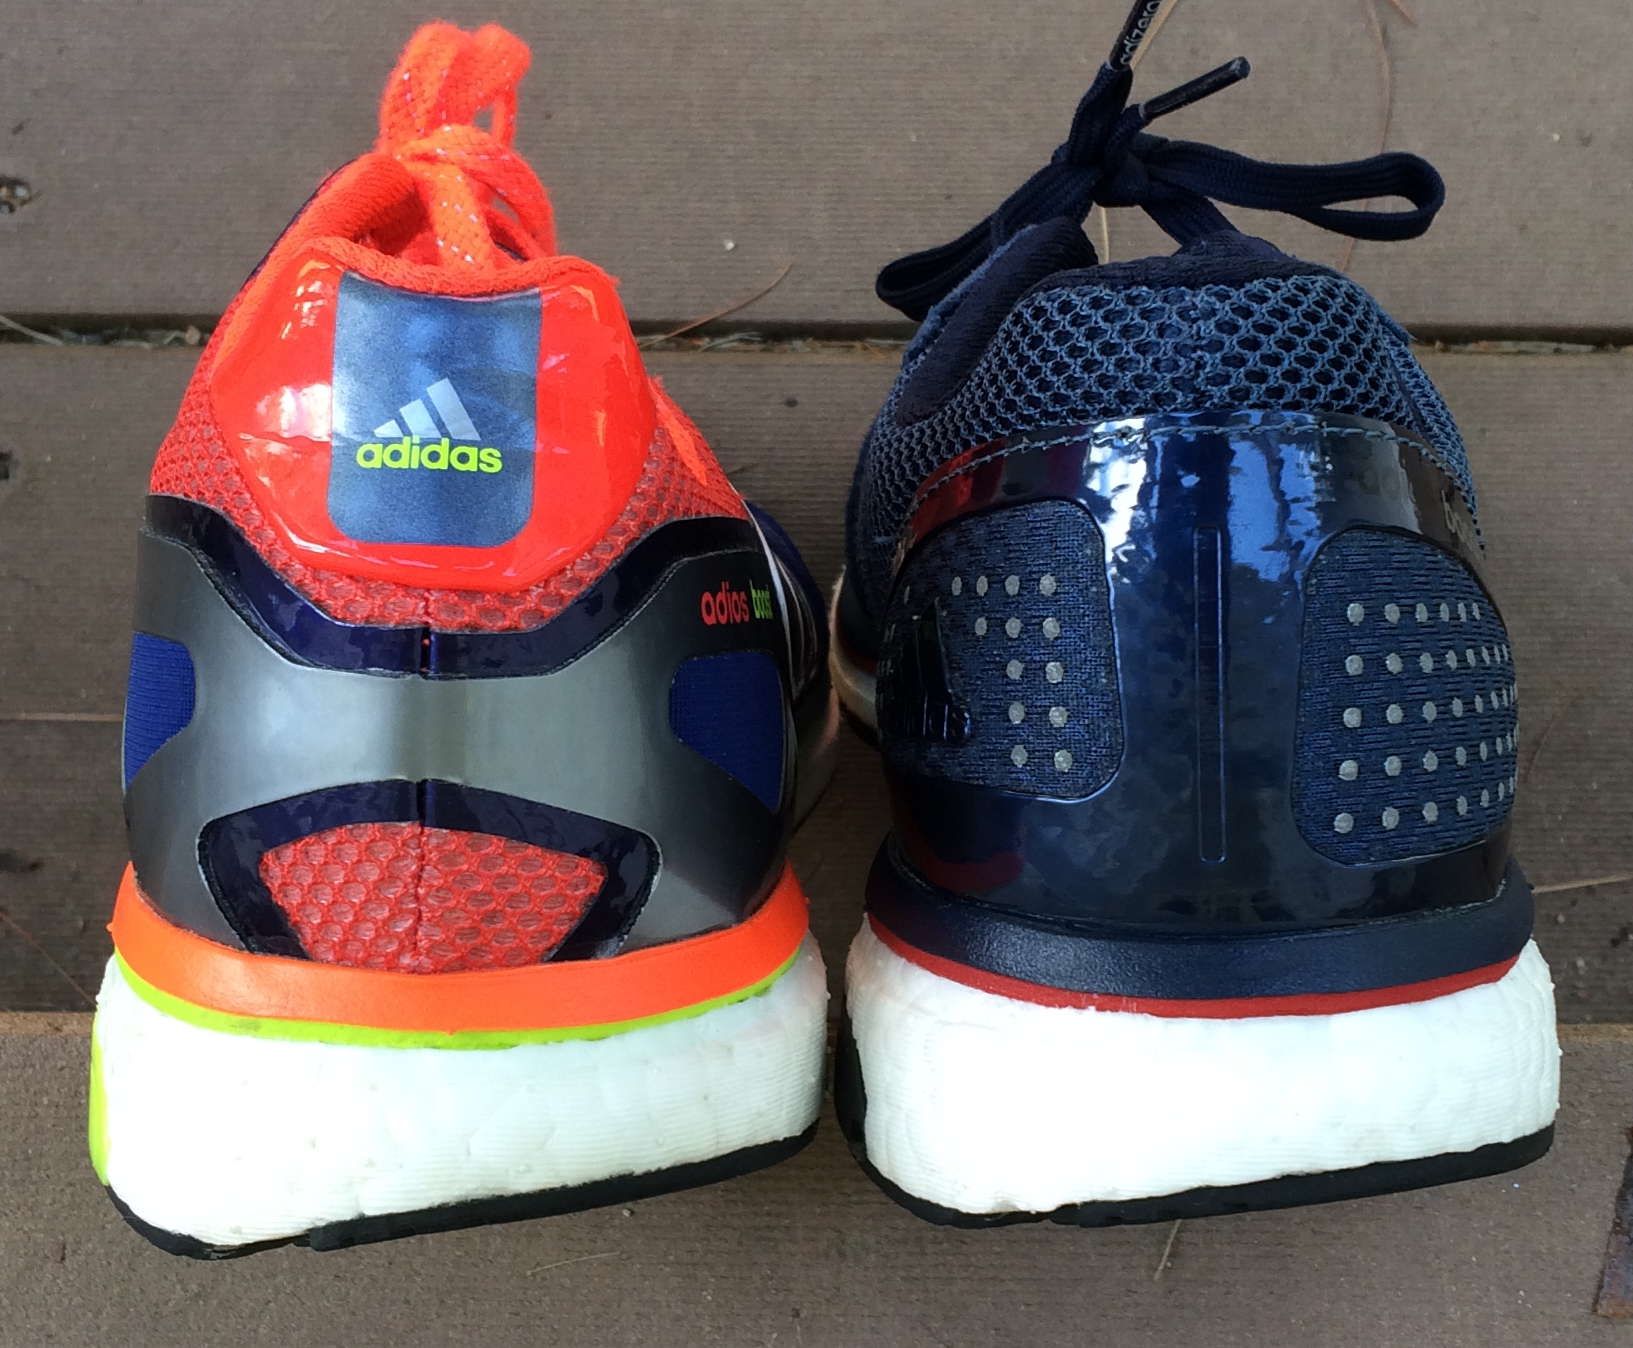 adidas Adios Boost 2 Review Same Great Ride, Different Fit